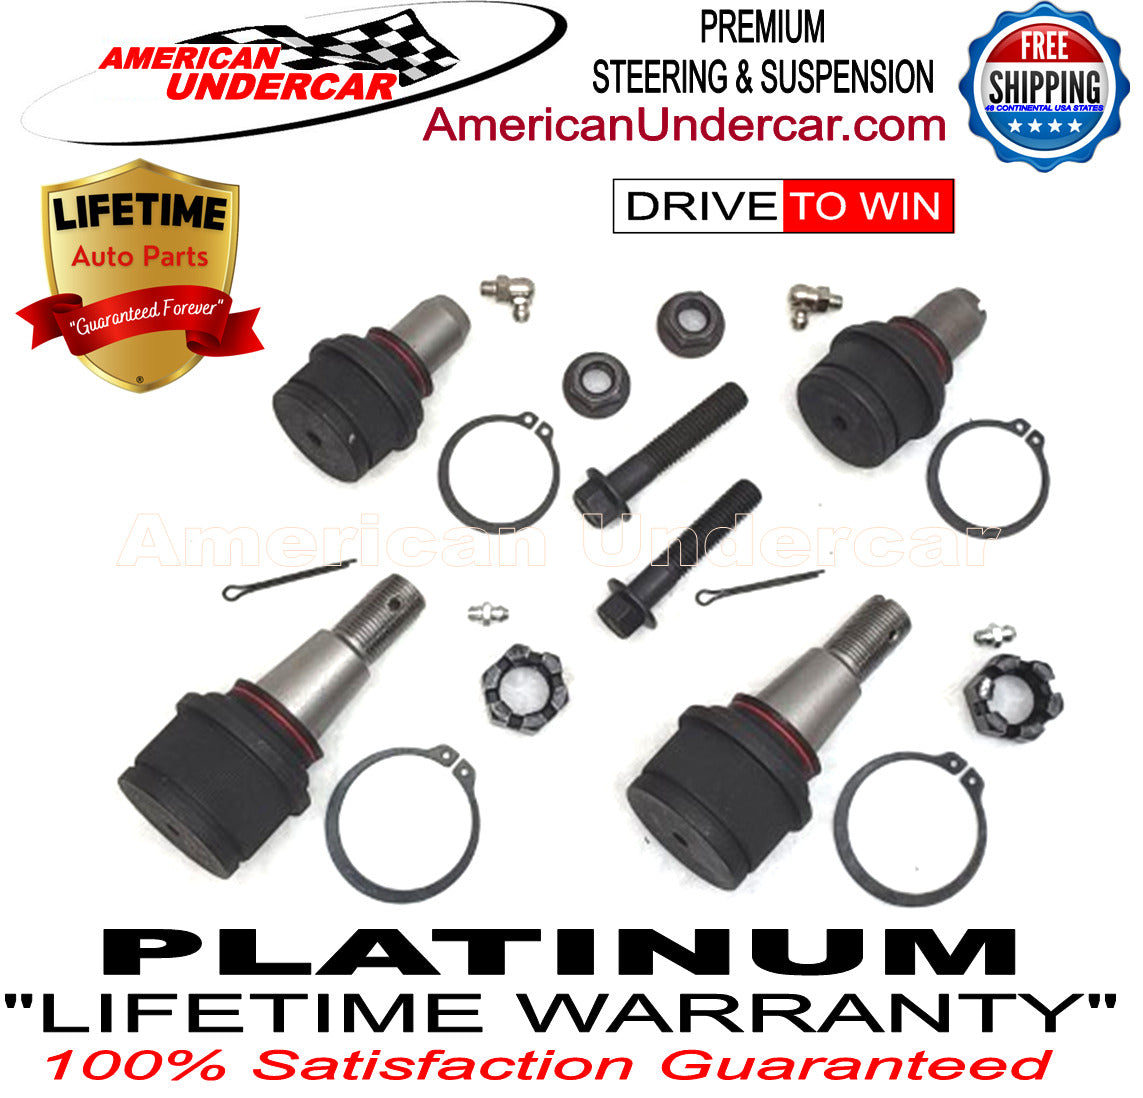 Lifetime Ball Joints Upper and Lower Suspension Kit for 1999-2019 Ford E350 2WD